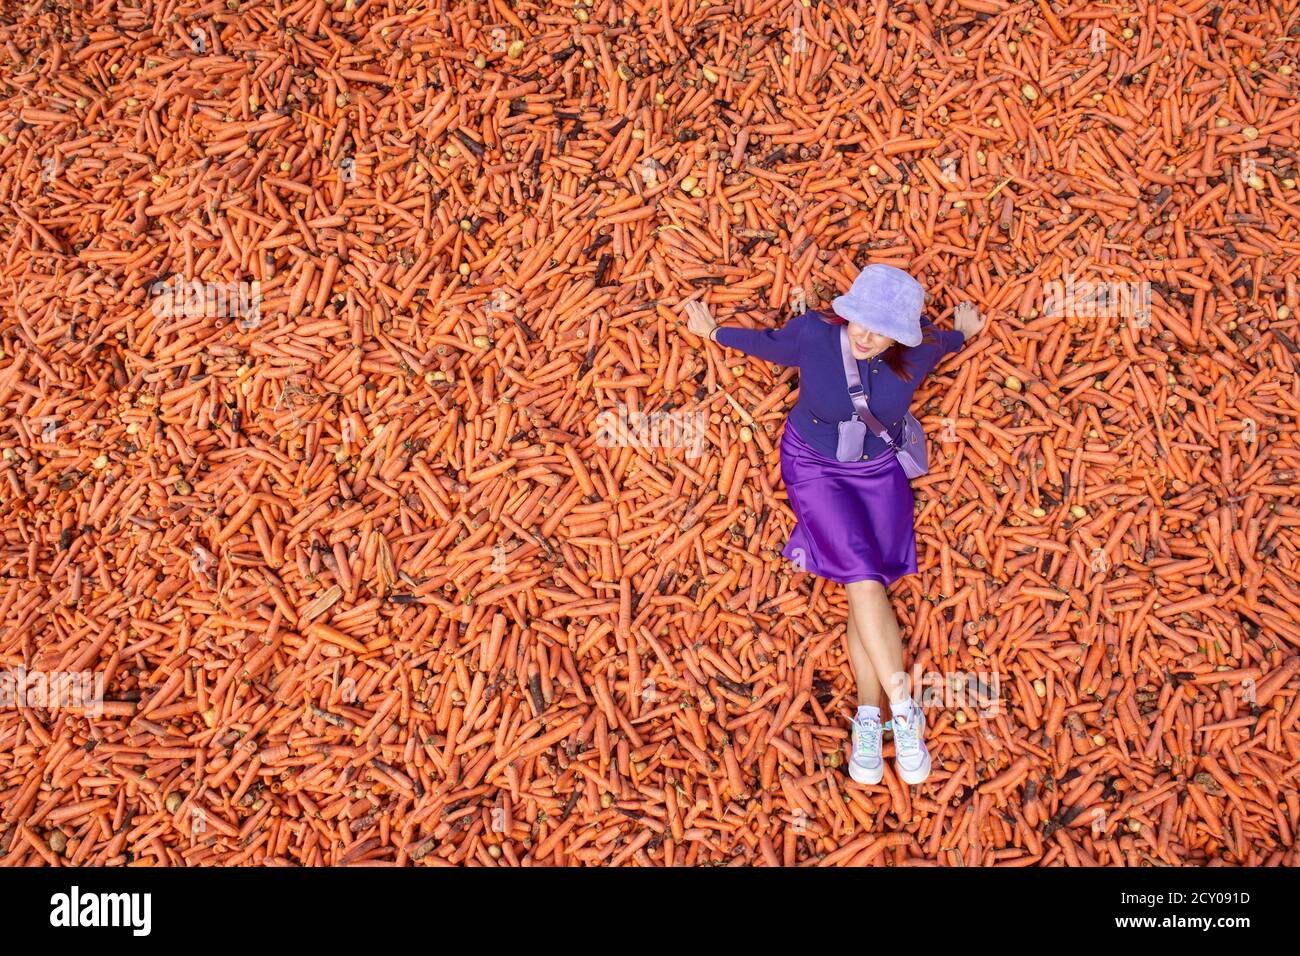 Student Lauren Gallagher with the art installation 'Grounding' by Rafael Perez Evans, which is made up of 29 tonnes of unwanted carrots ouside the Ben Pimlott building at Goldsmiths College, London. Stock Photo